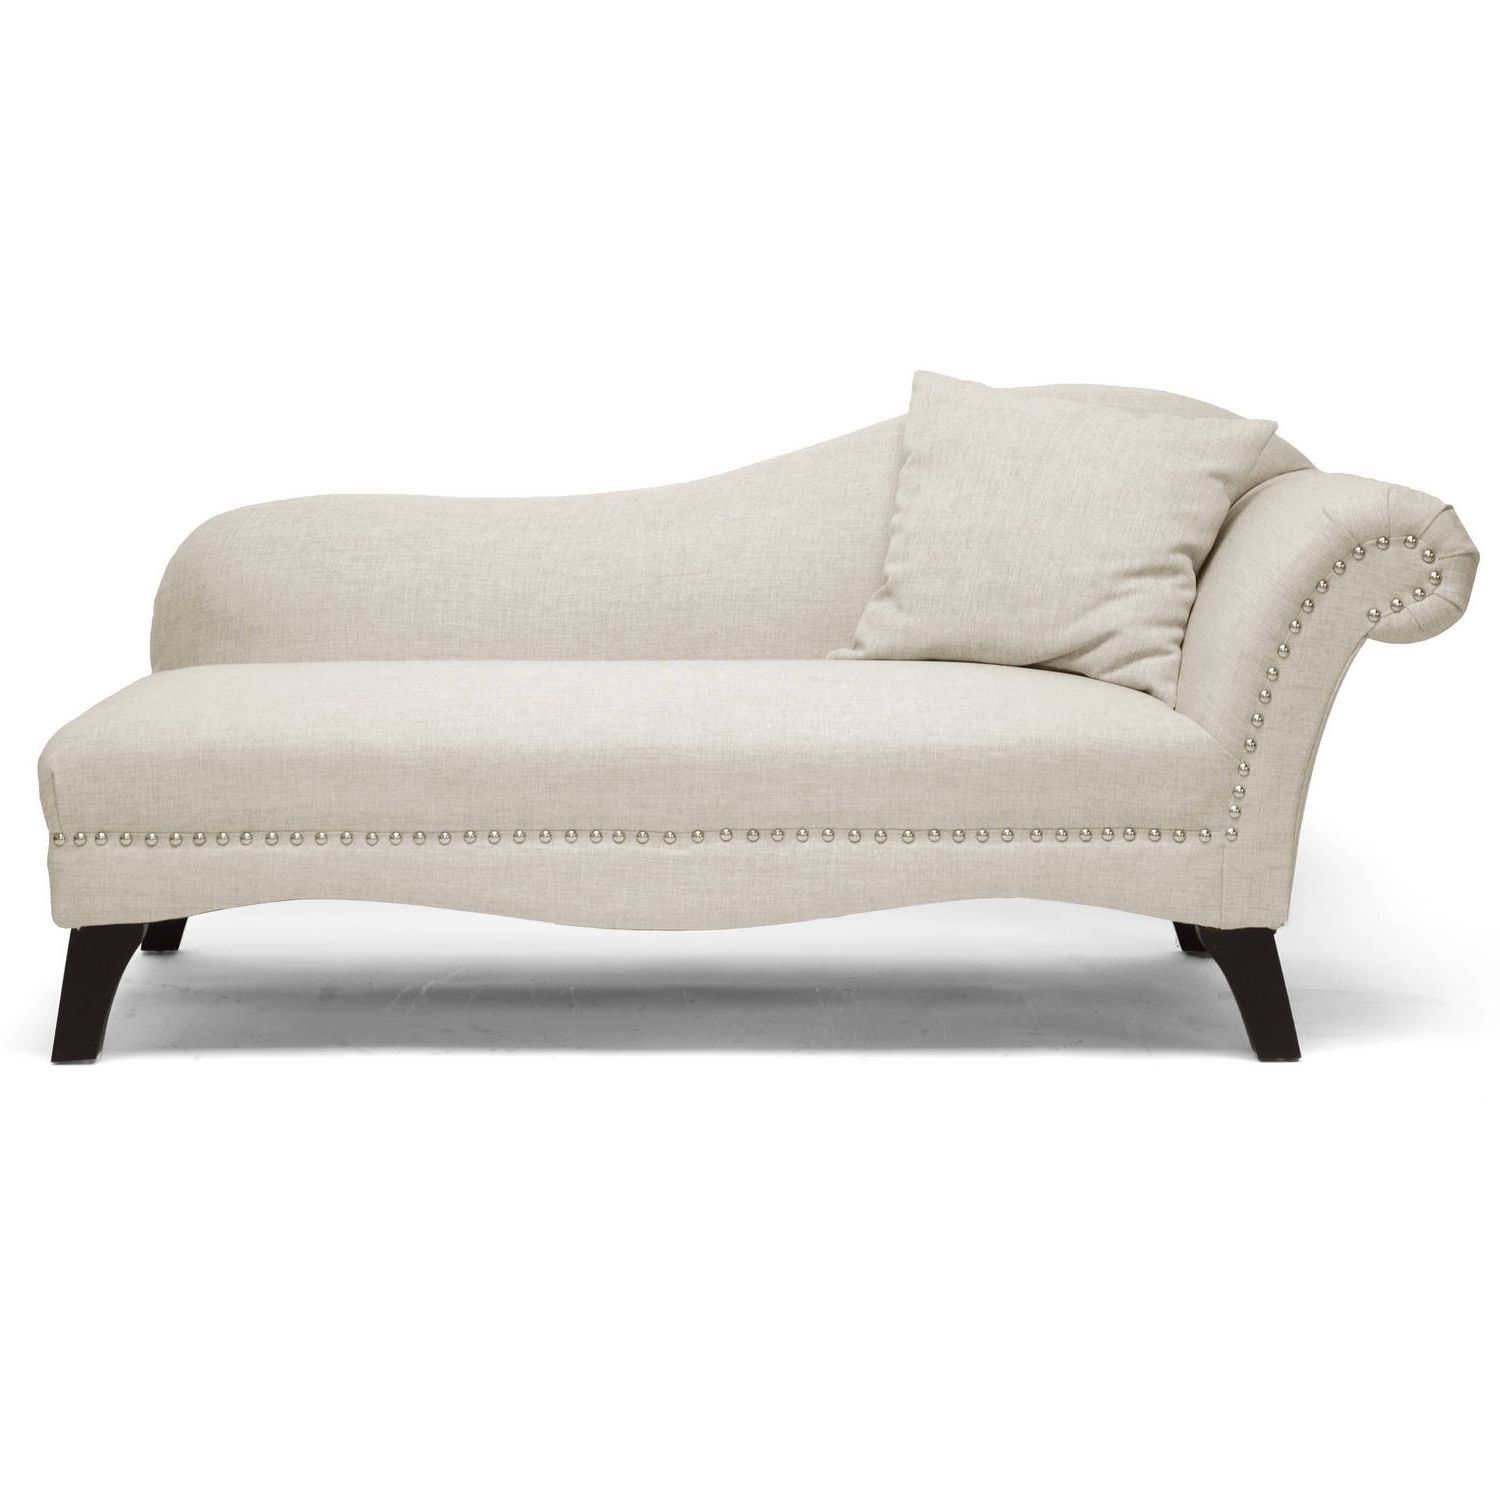 Lounge Sofas And Chairs Throughout Famous Chaise Lounges – Walmart (Photo 1 of 15)